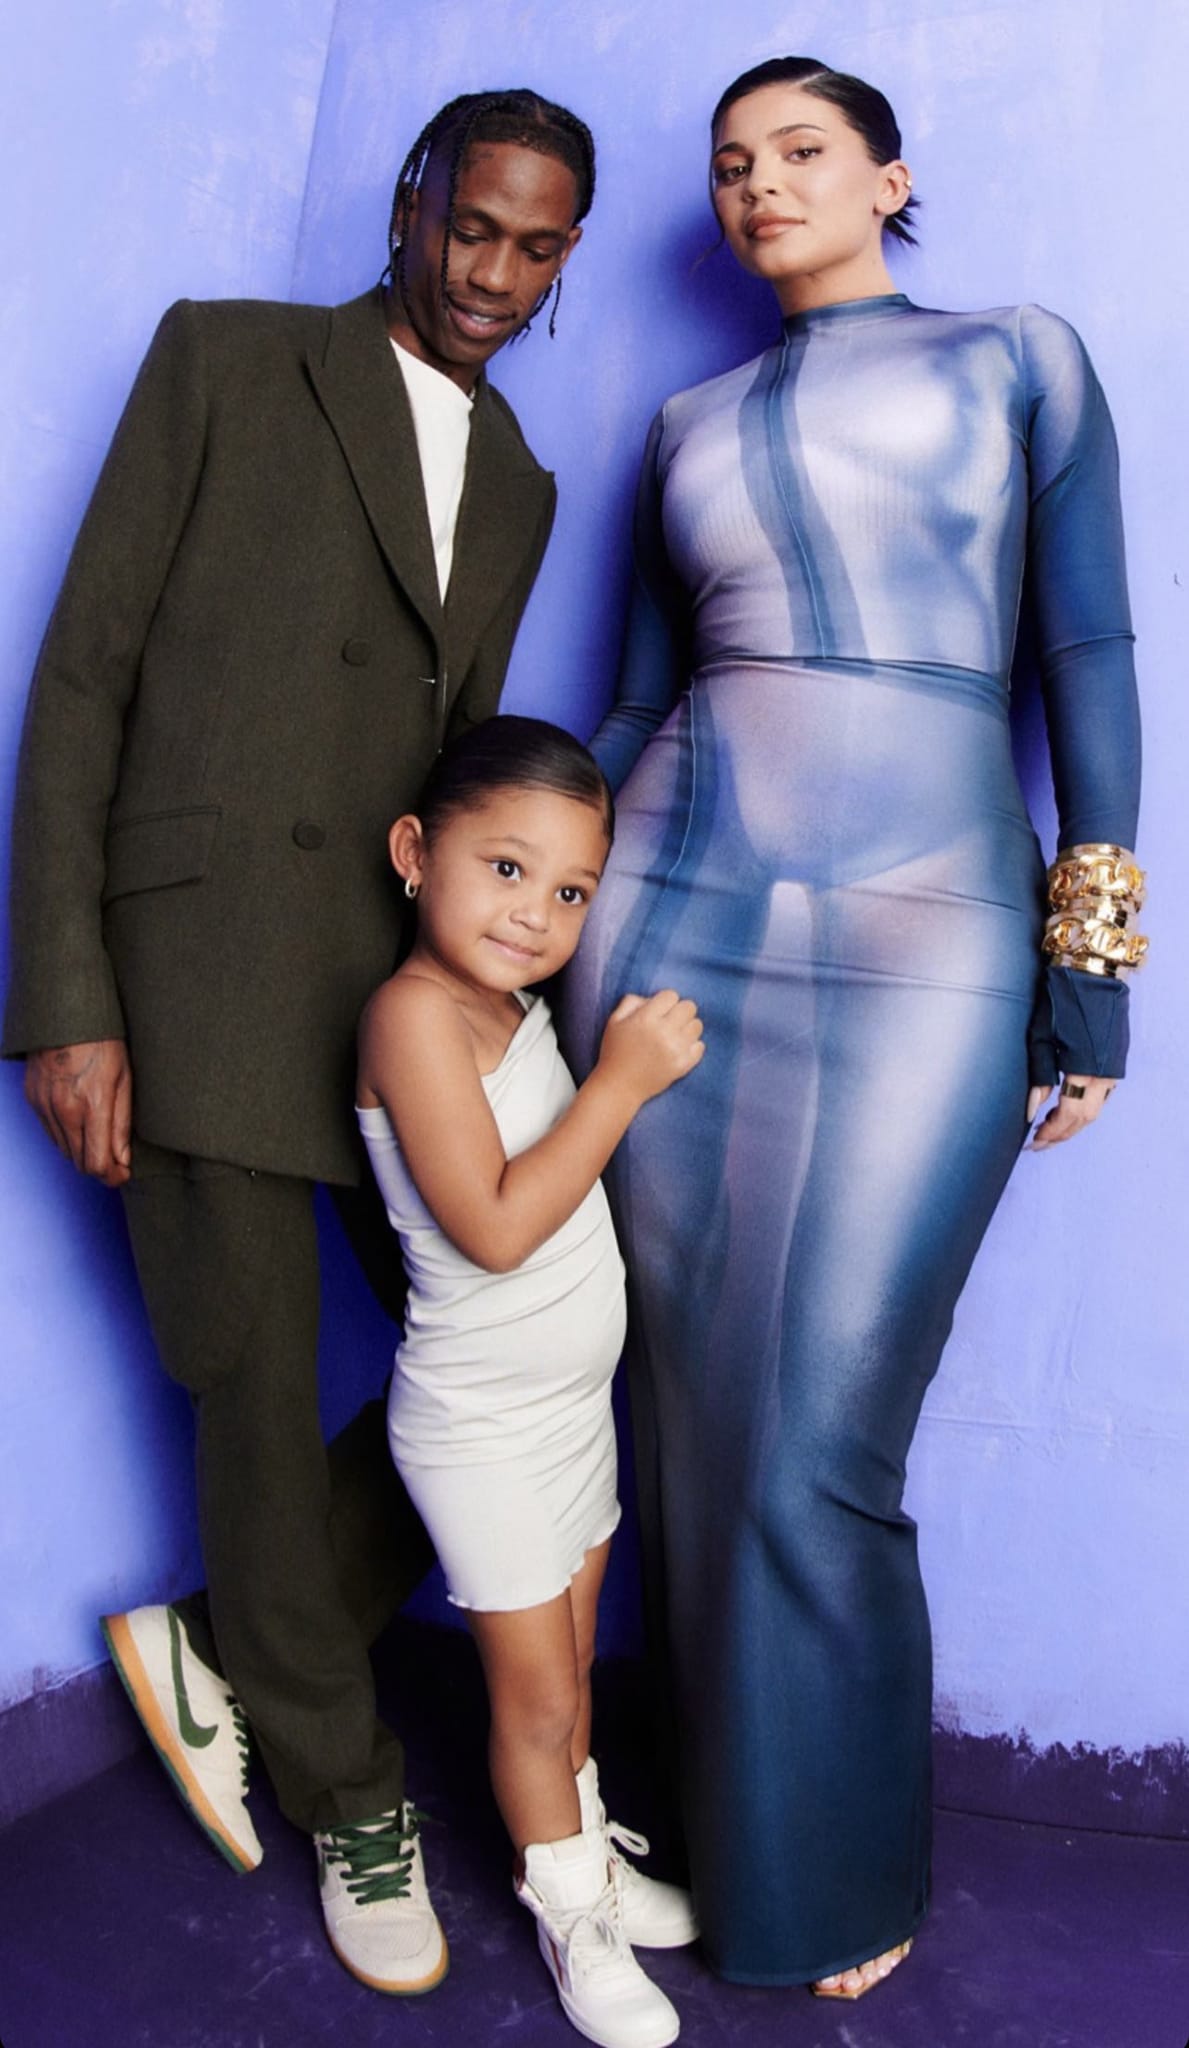 Travis Scott and Kylie Jenner attend the 2022 Billboard Music Awards with their daughter Stormi